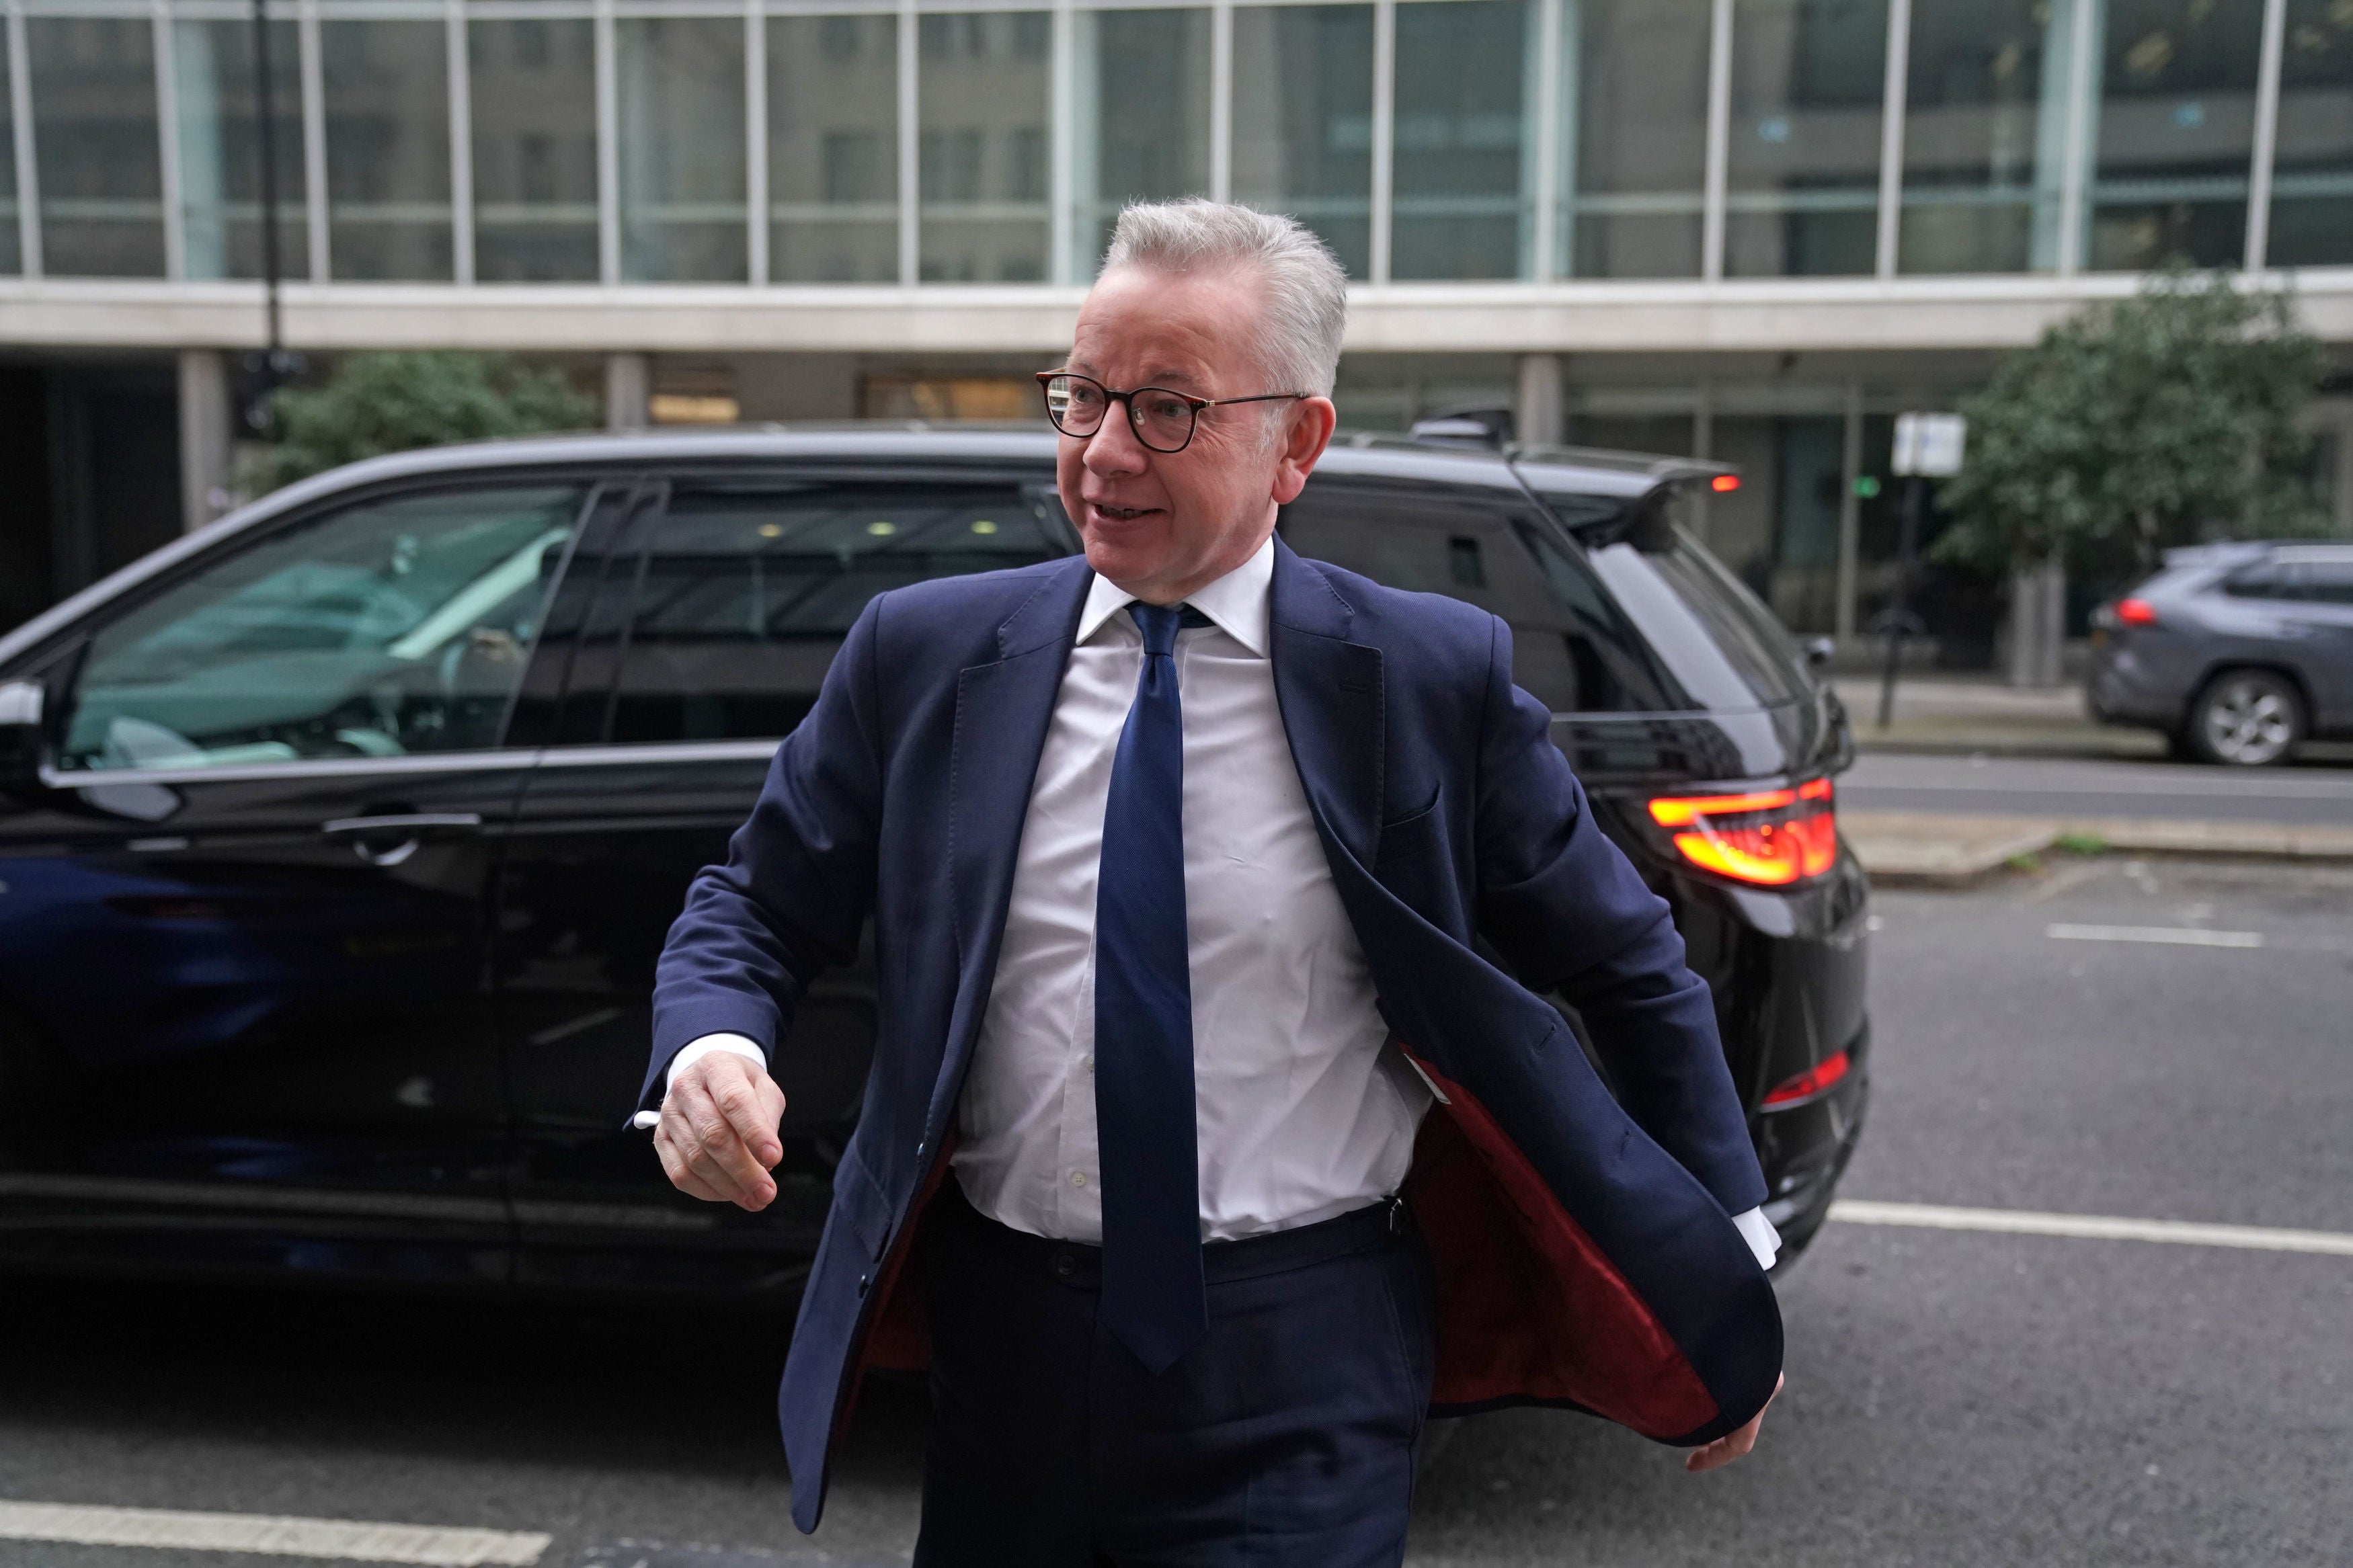 Gove arrives at Broadcasting House on Sunday morning